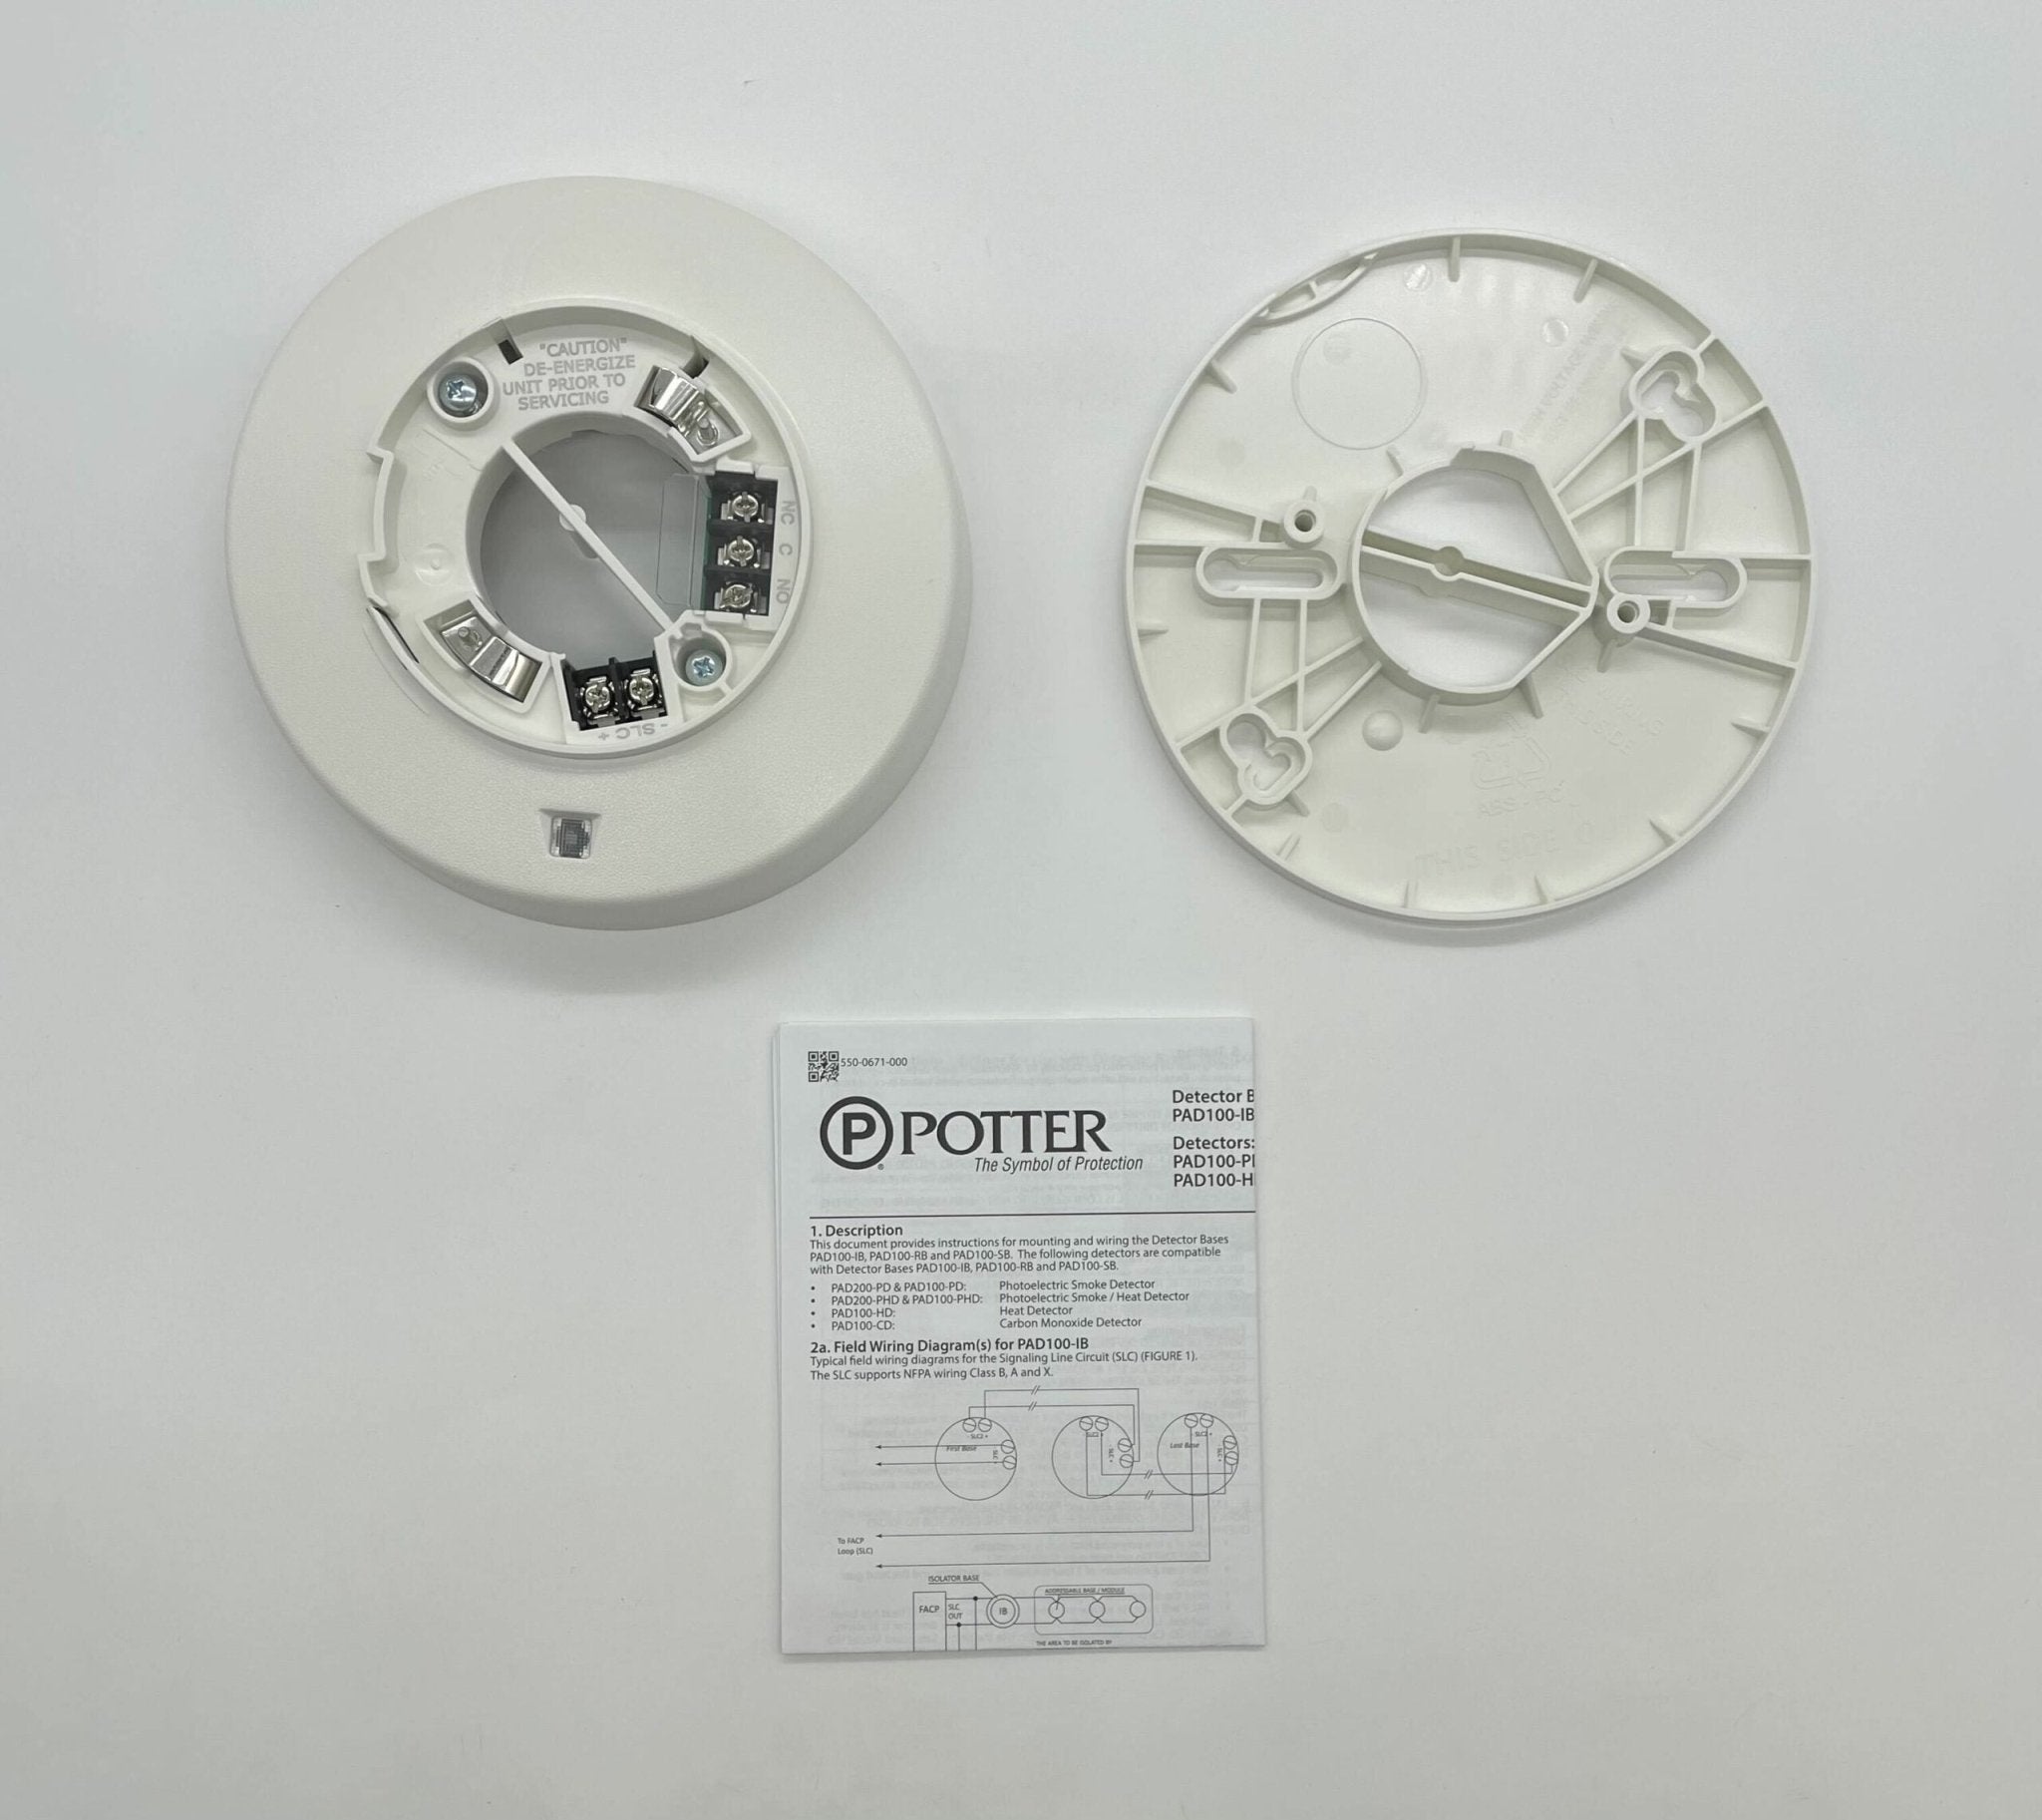 Potter PAD100-RB - The Fire Alarm Supplier